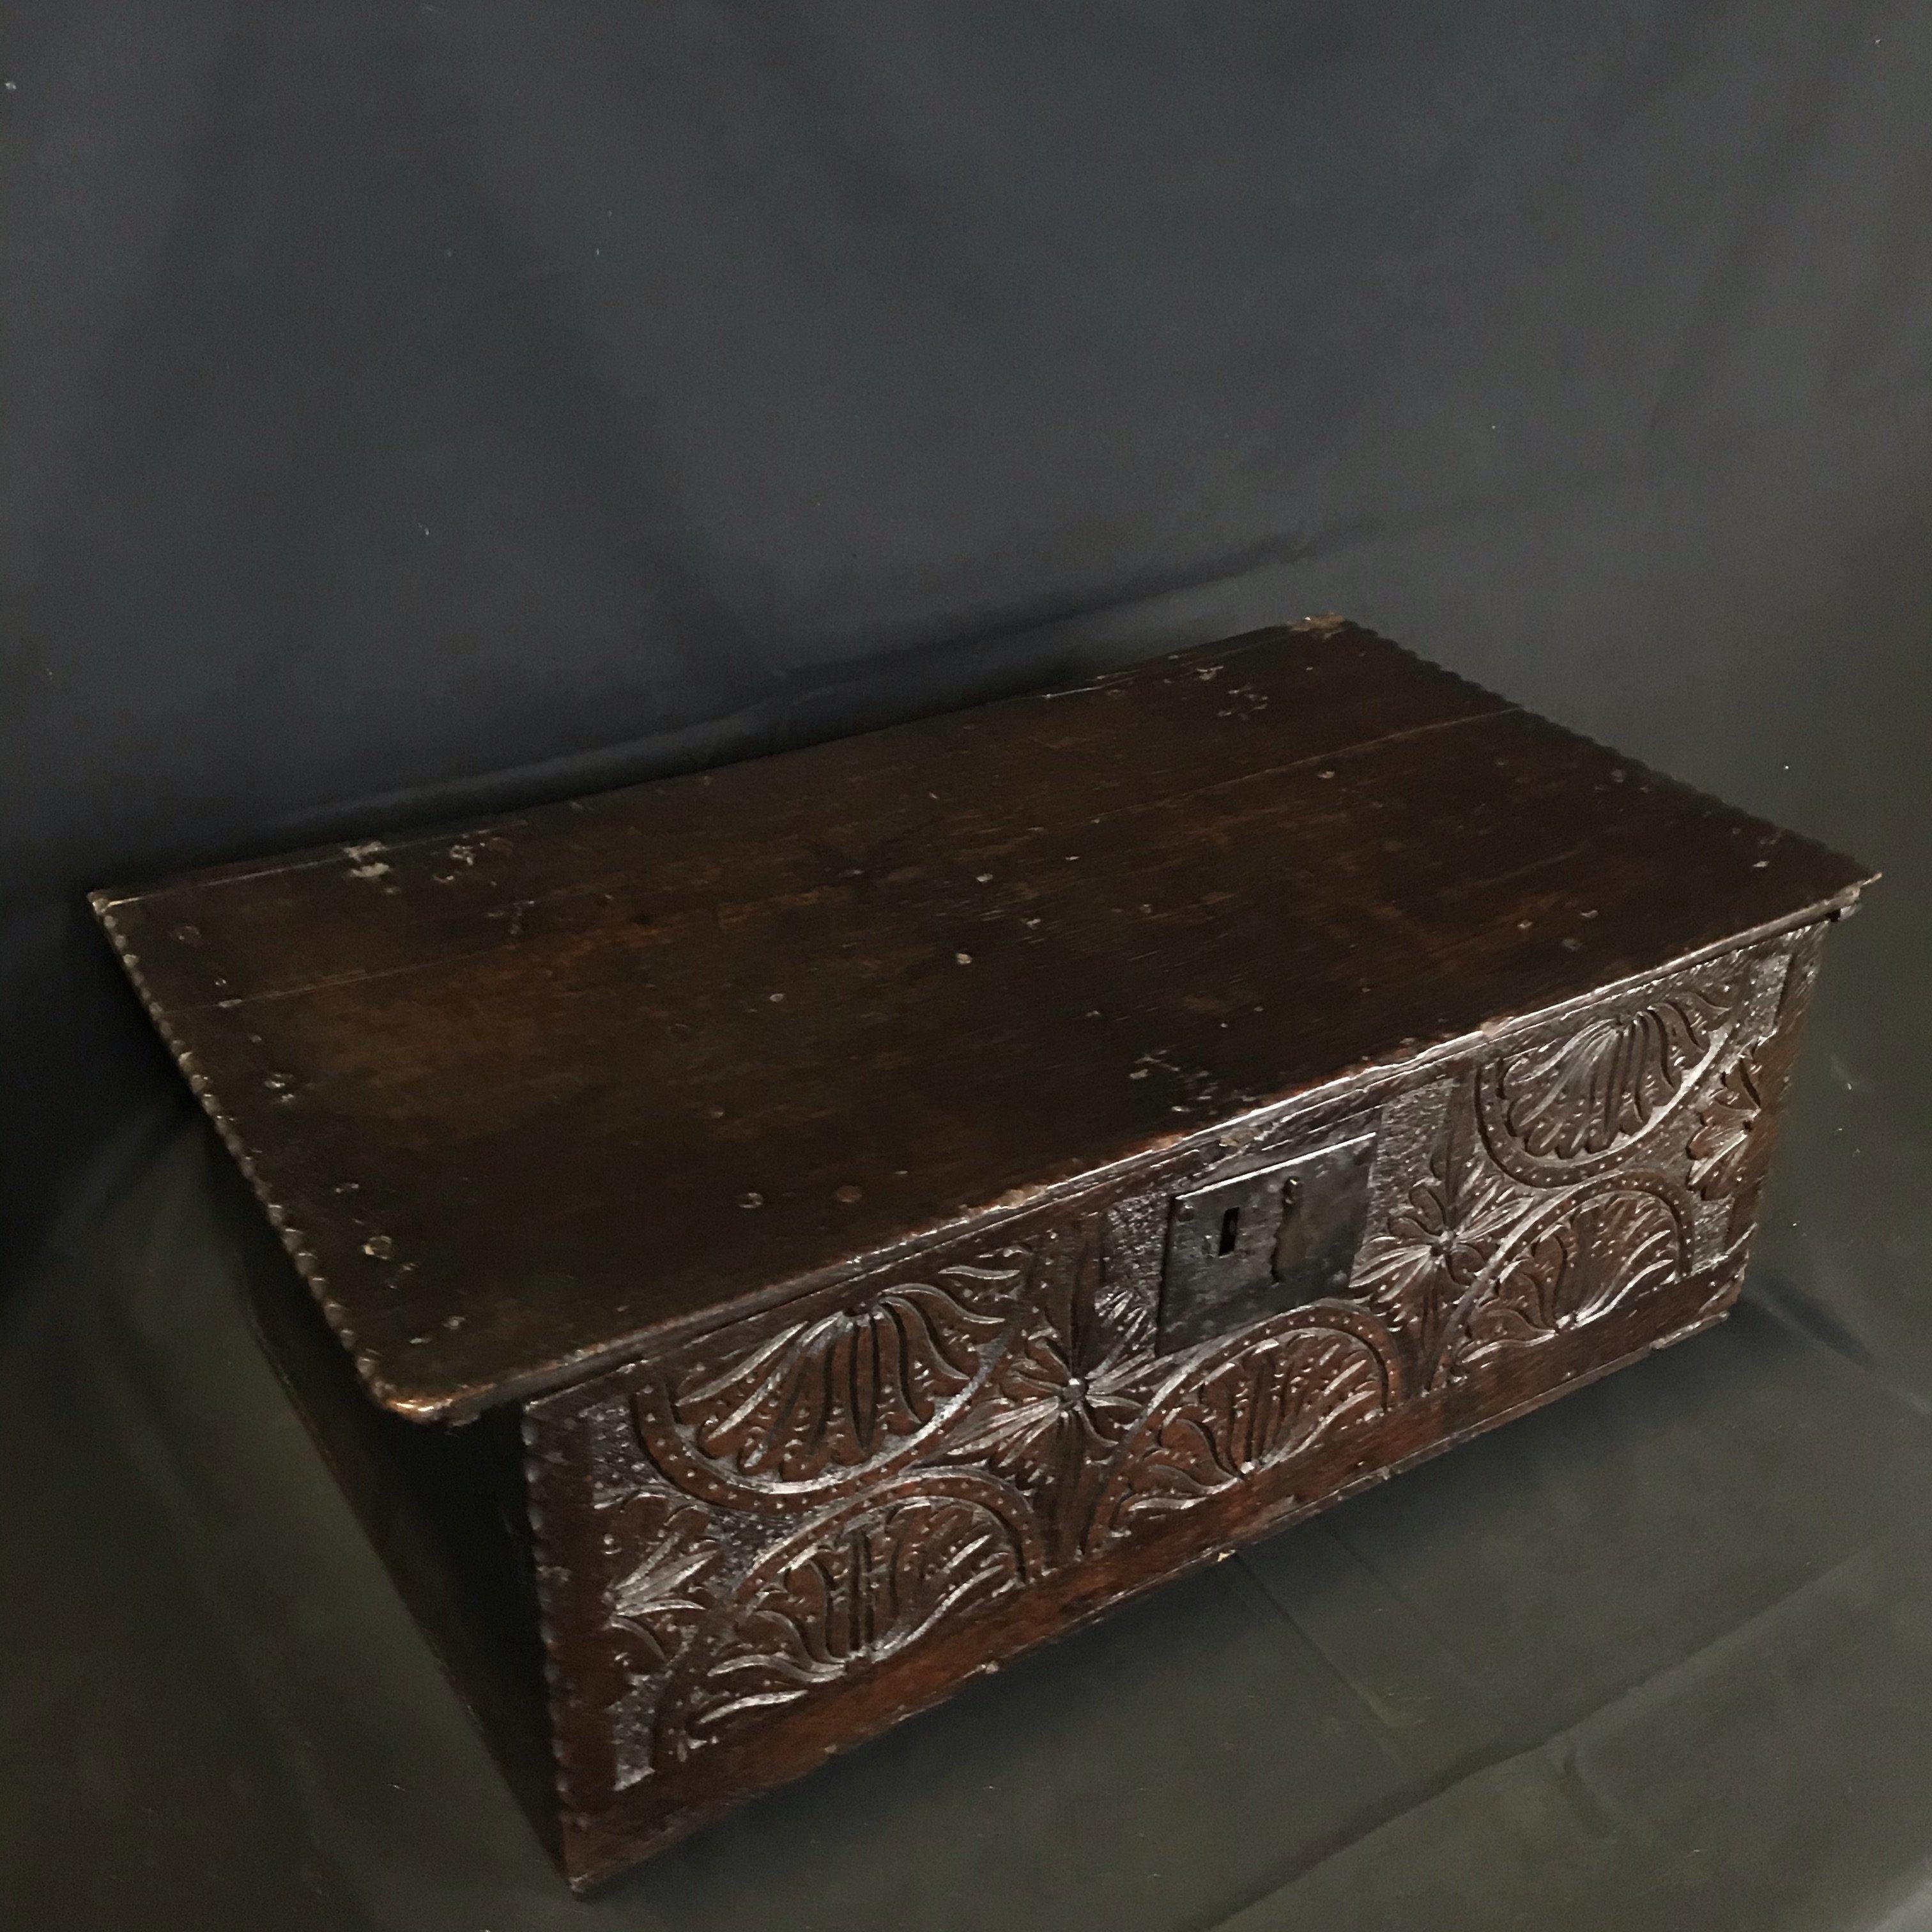 British 17th century bible box - early oak with beautiful carvings. Six solid wood slab sides. Bought in the north of England.
#5329.